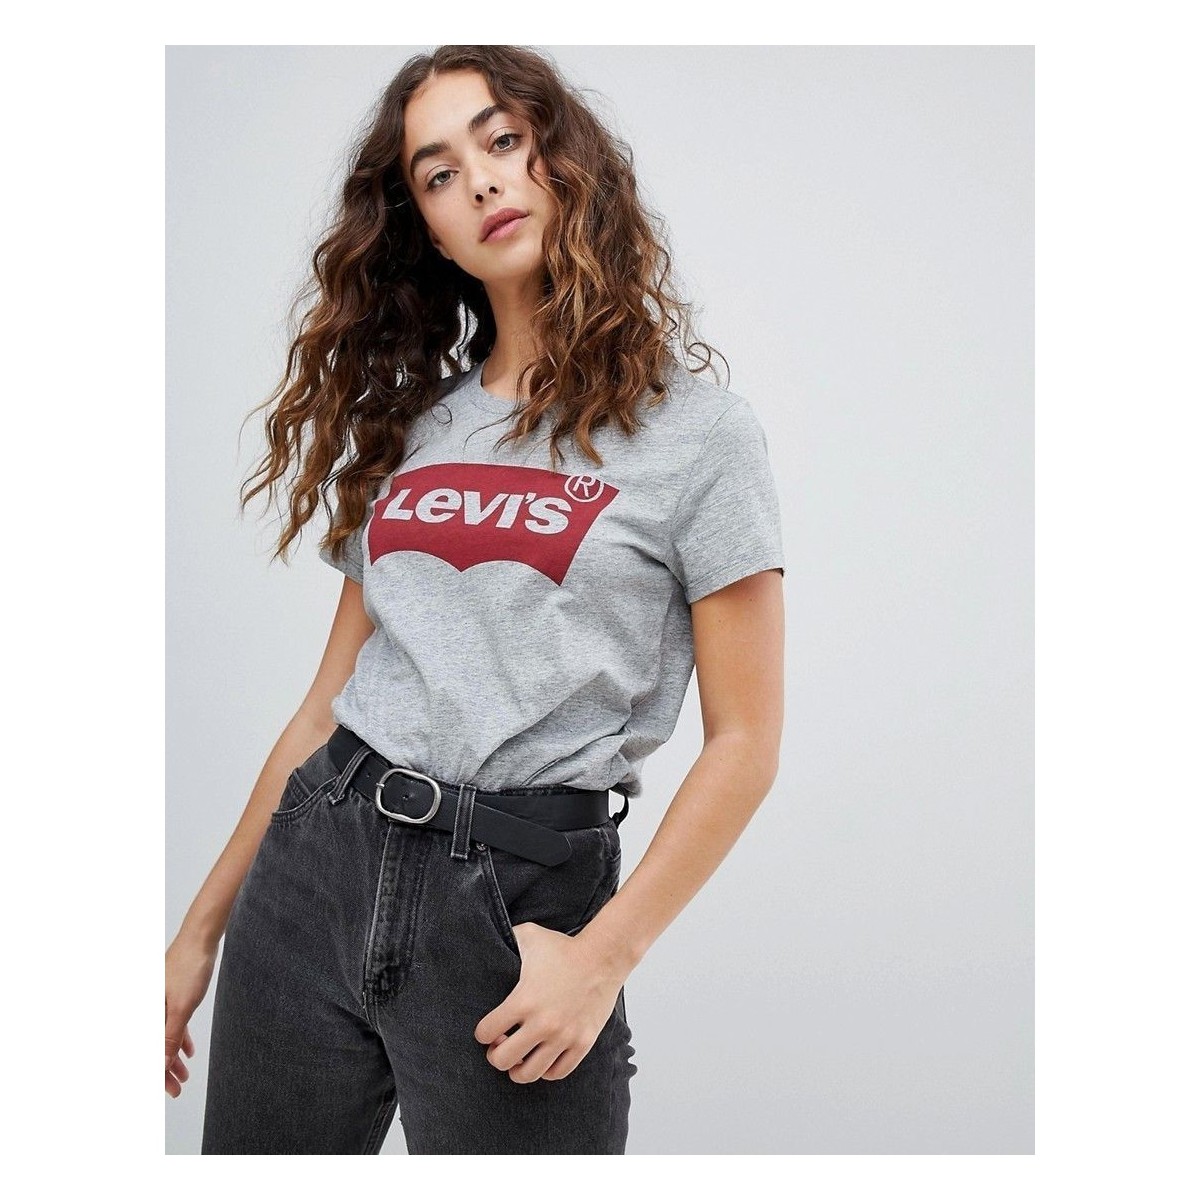 textil Mujer Tops y Camisetas Levi's 17369 THE PERFECT TEE-0263 BETTER BATWING SMOKE Gris